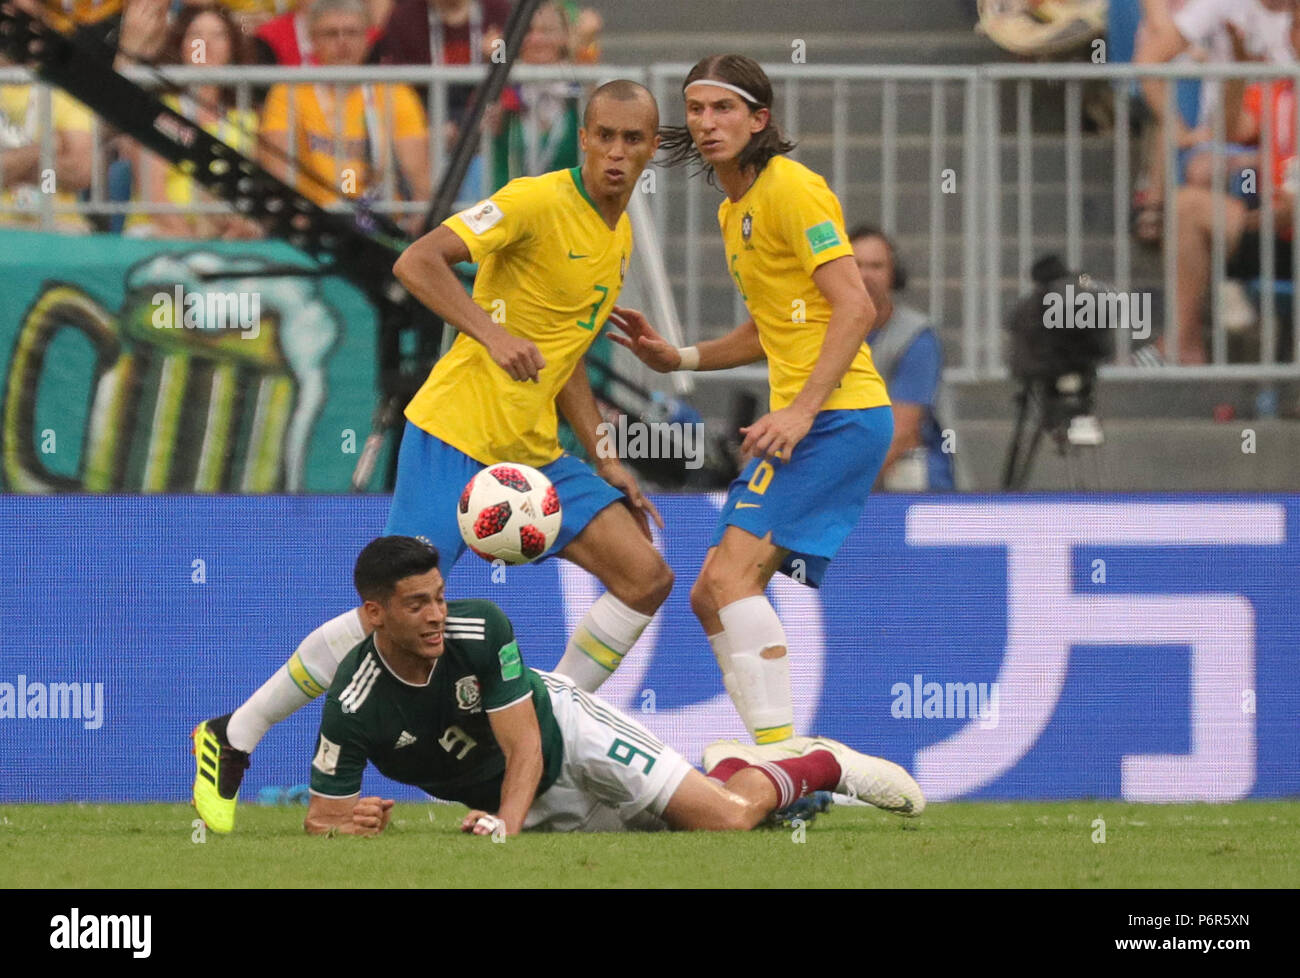 Samara, Russia. 02nd July, 2018. Soccer, World Cup 2018, Final round - round of 16: Mexico vs. Brazil at the Samara stadium: Brazil's Miranda (top L) and Mexico's Raul Jimenez (bottom) vying for the ball. Credit: Christian Charisius/dpa/Alamy Live News Stock Photo